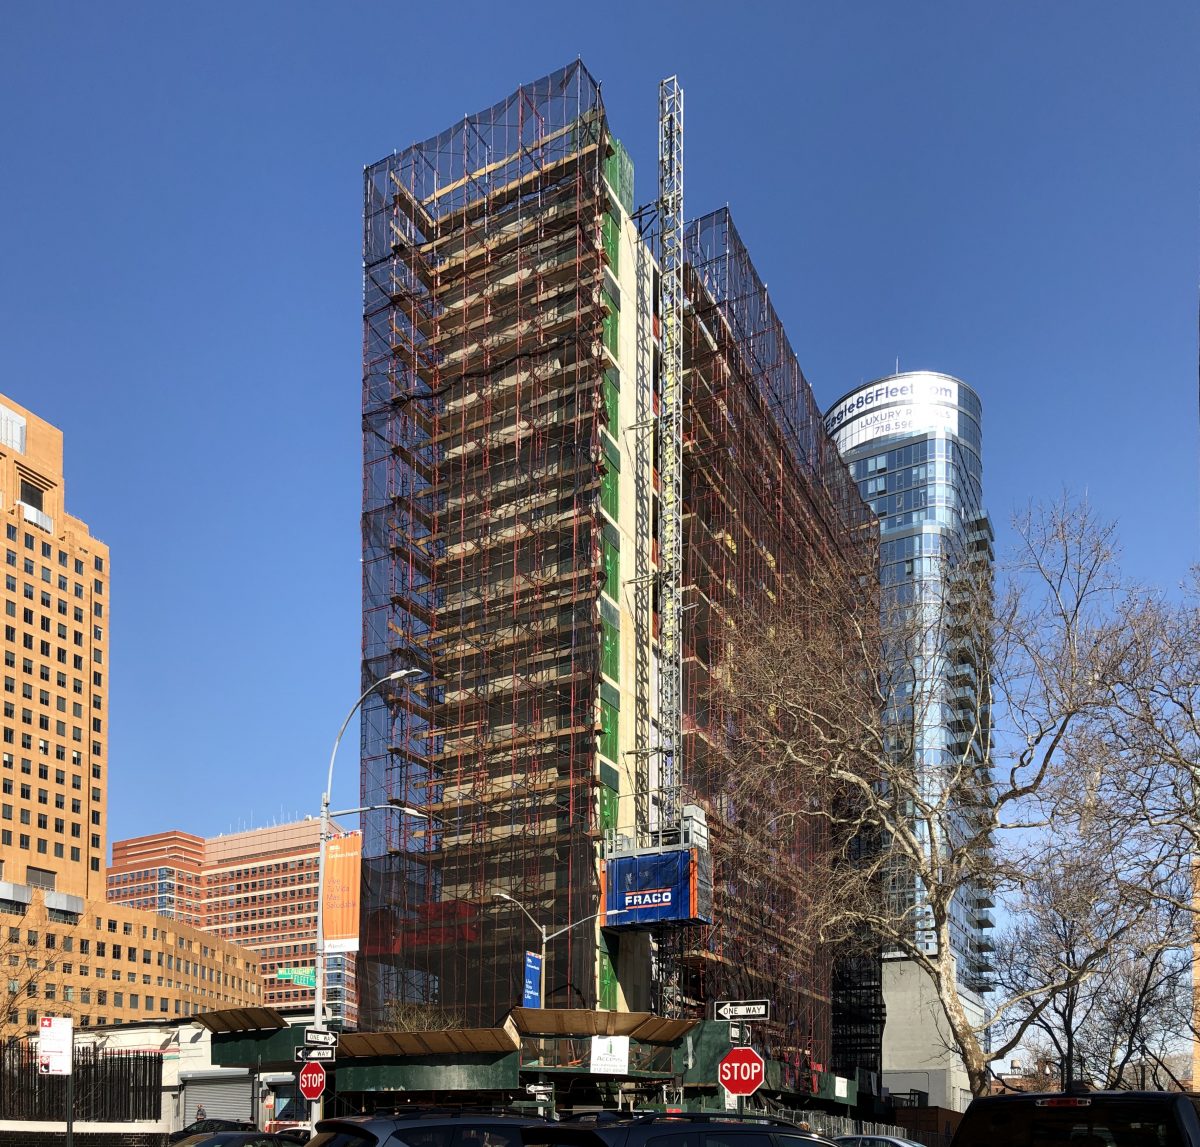 Photo of construction at The Alfred on Fleet in April 2020 - Photo by Michael Young